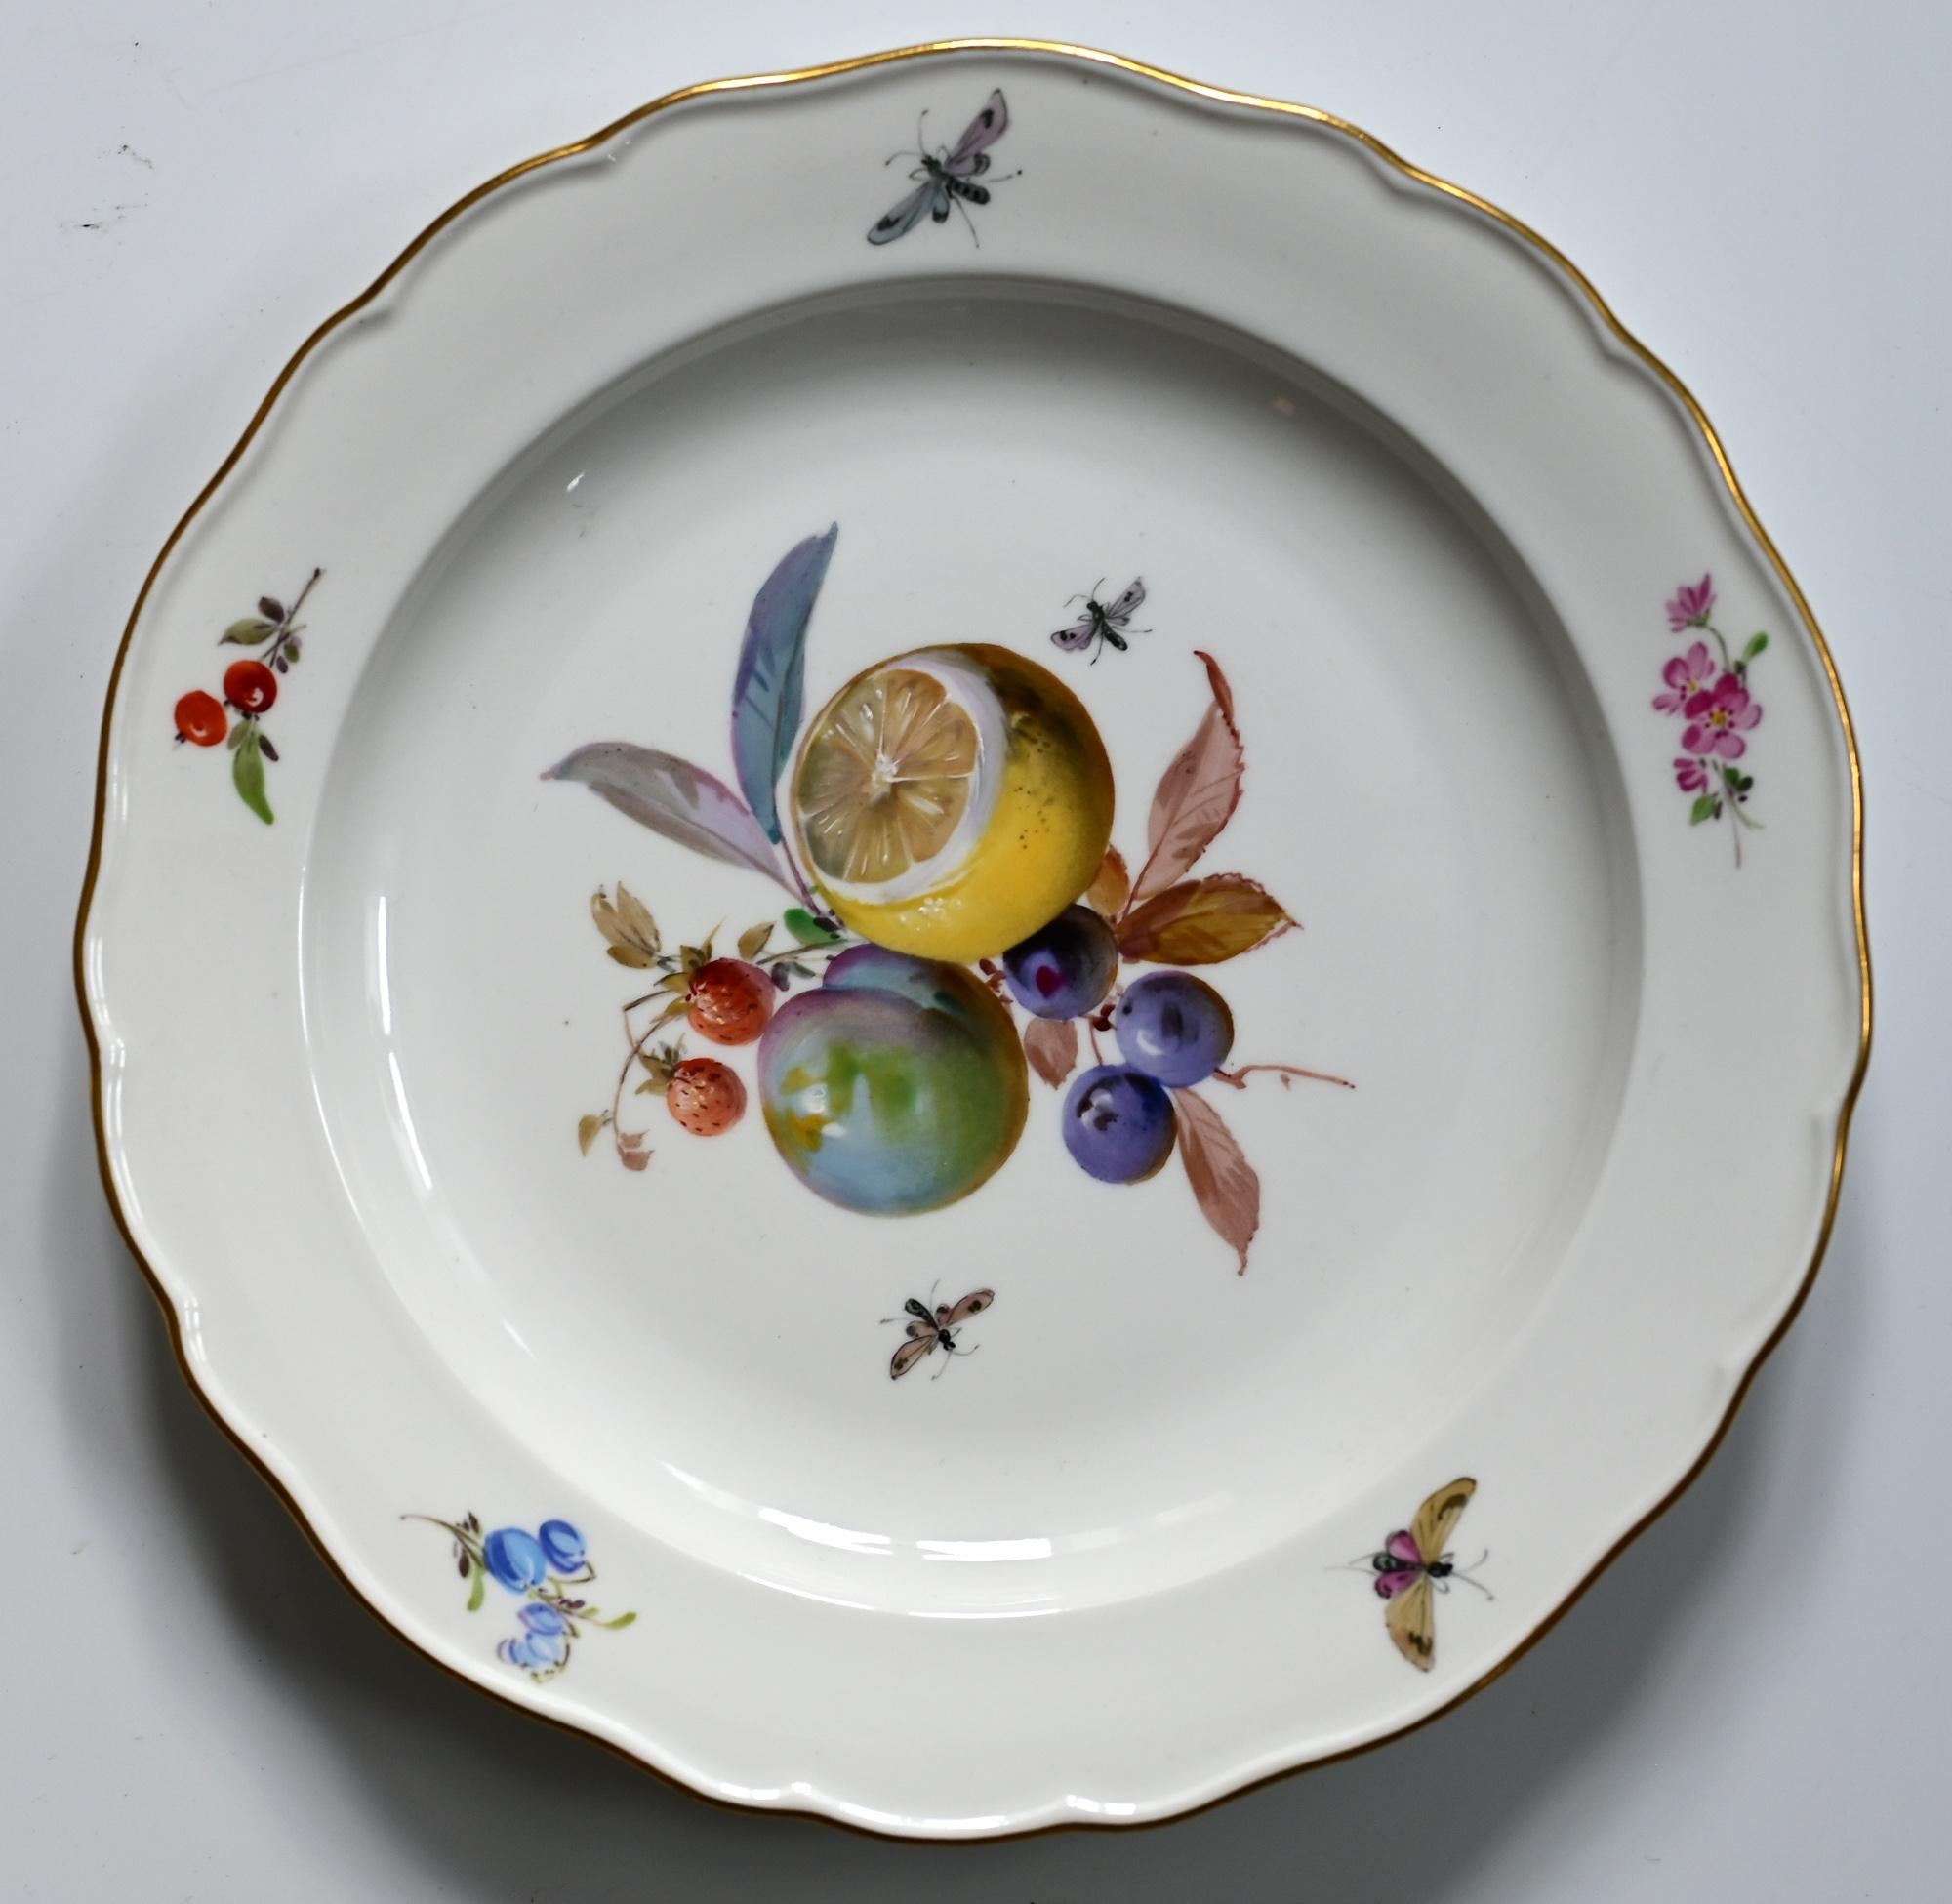 Set of 12 Meissen Plates with Fruits, Insects and Flowers 19.Jhdt Porcelain 3